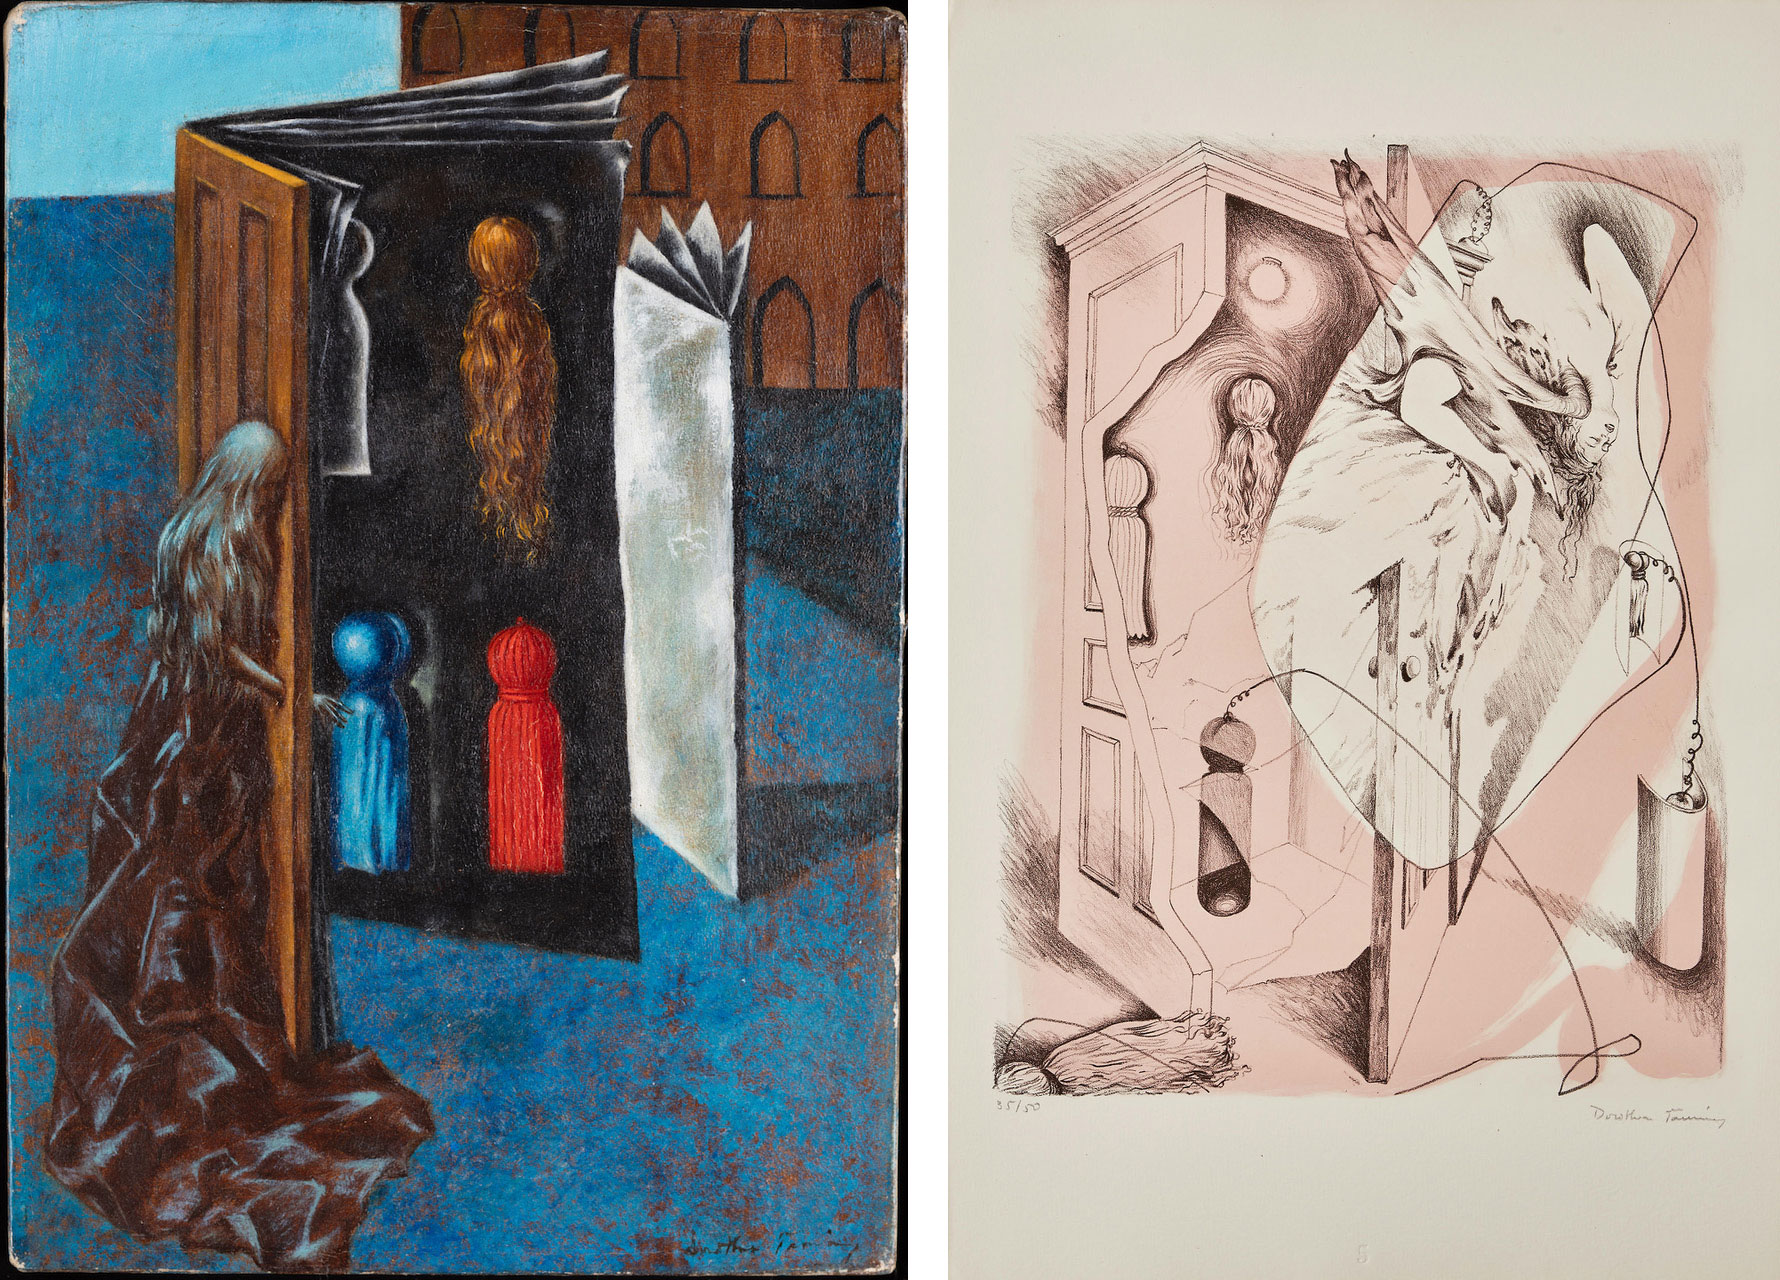 Two images, one a painting of woman reaching hand through doorknob, the other print of a woman hanging upside down